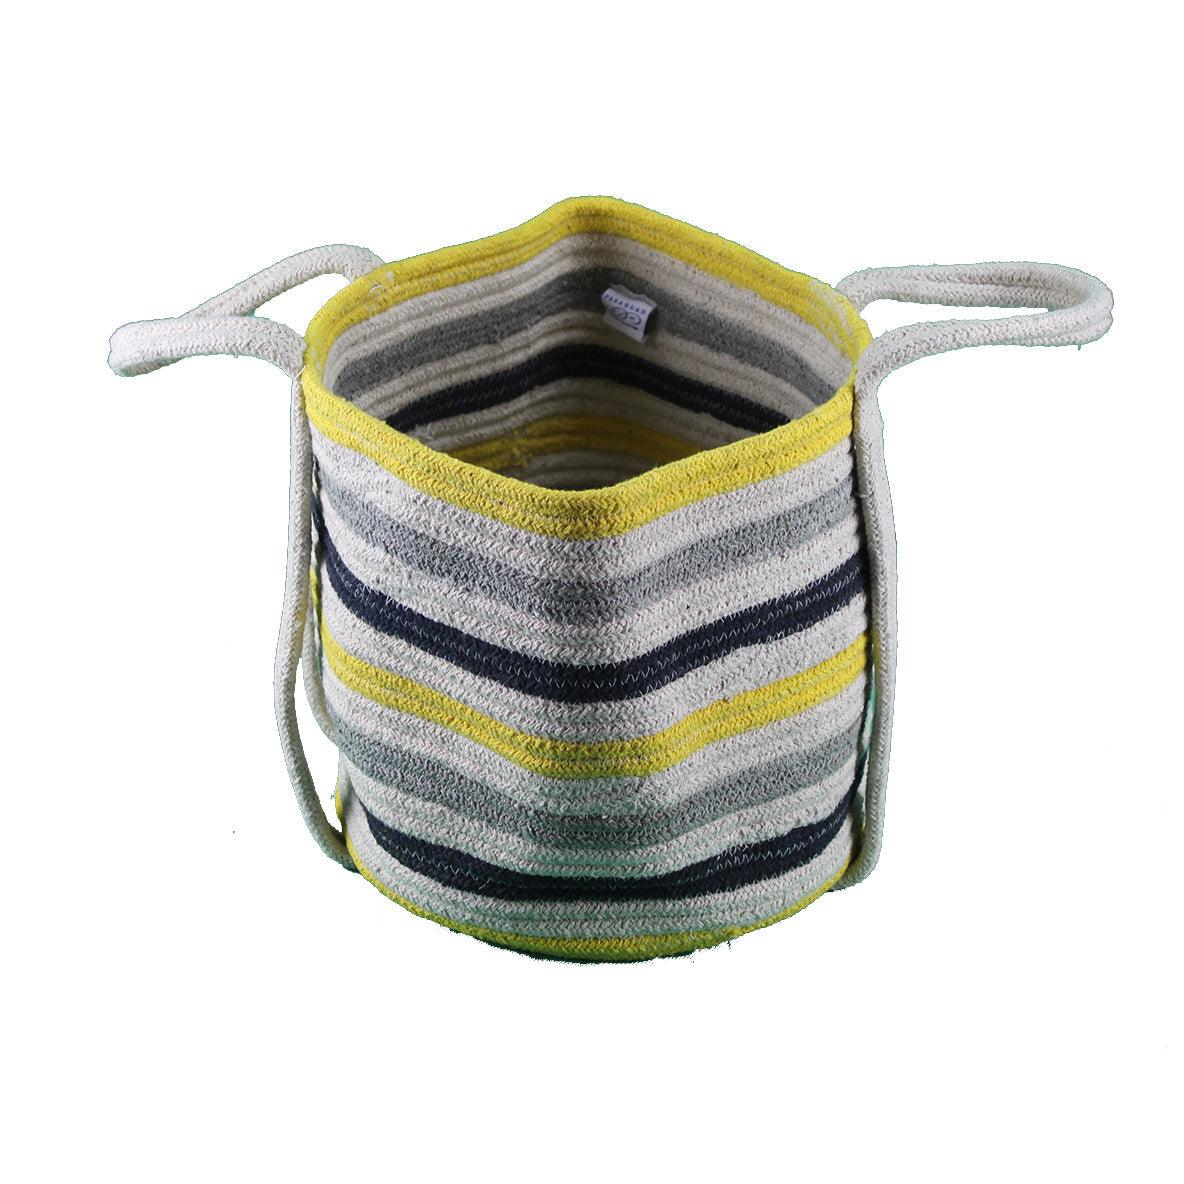 Yellow and Blue Striped Nested Basket Set (3pcs)